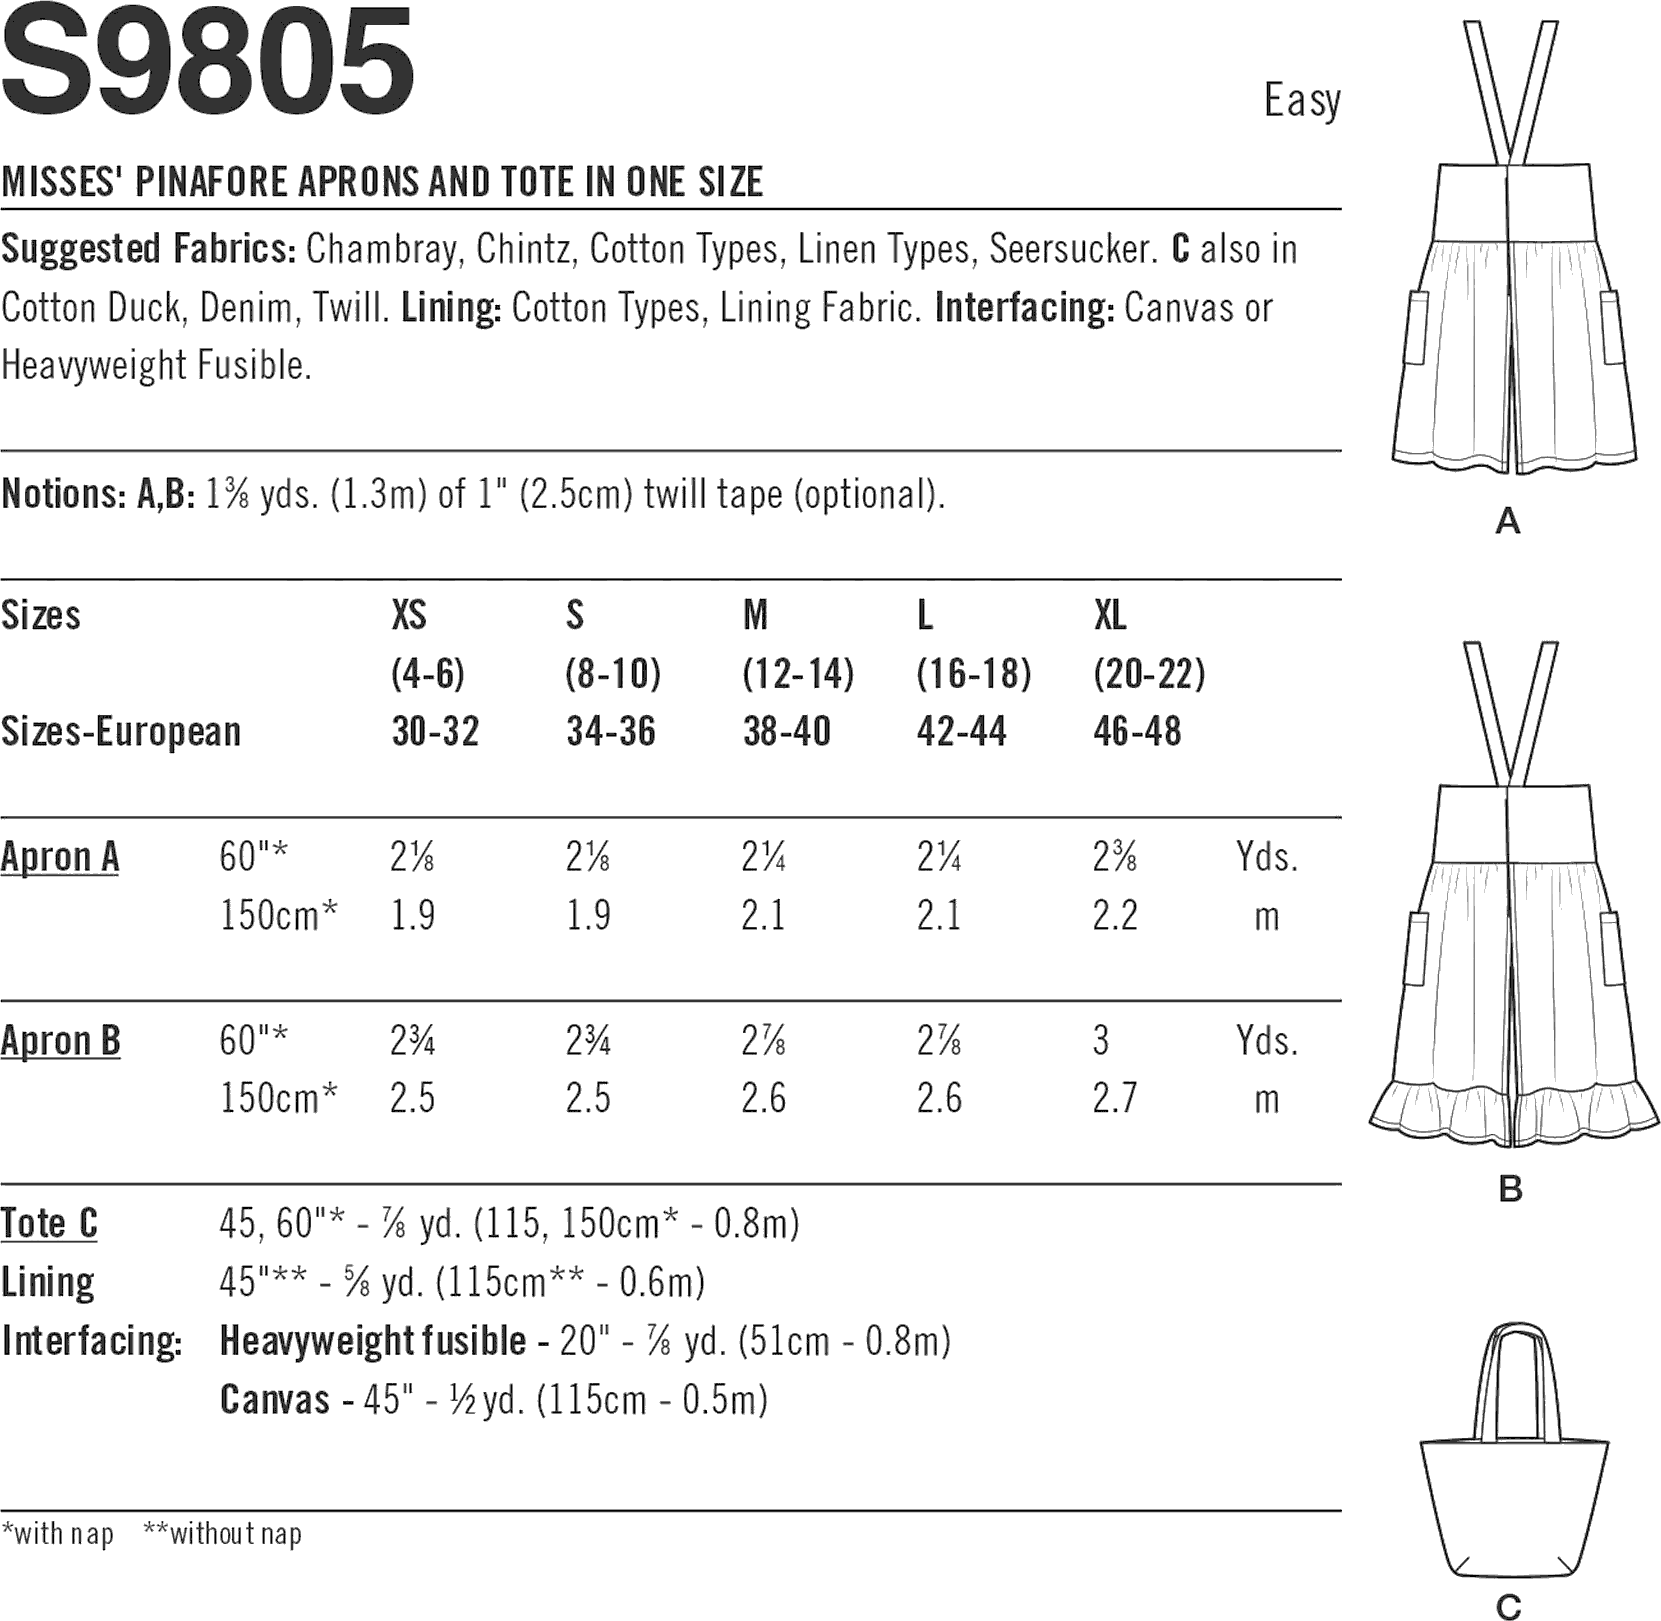 Simplicity Sewing Pattern S9805 Misses Pinafore Aprons and Tote in One Size by Elaine Heigl Designs 9805 Fabric Quantity Requirements From Patternsandplains.com